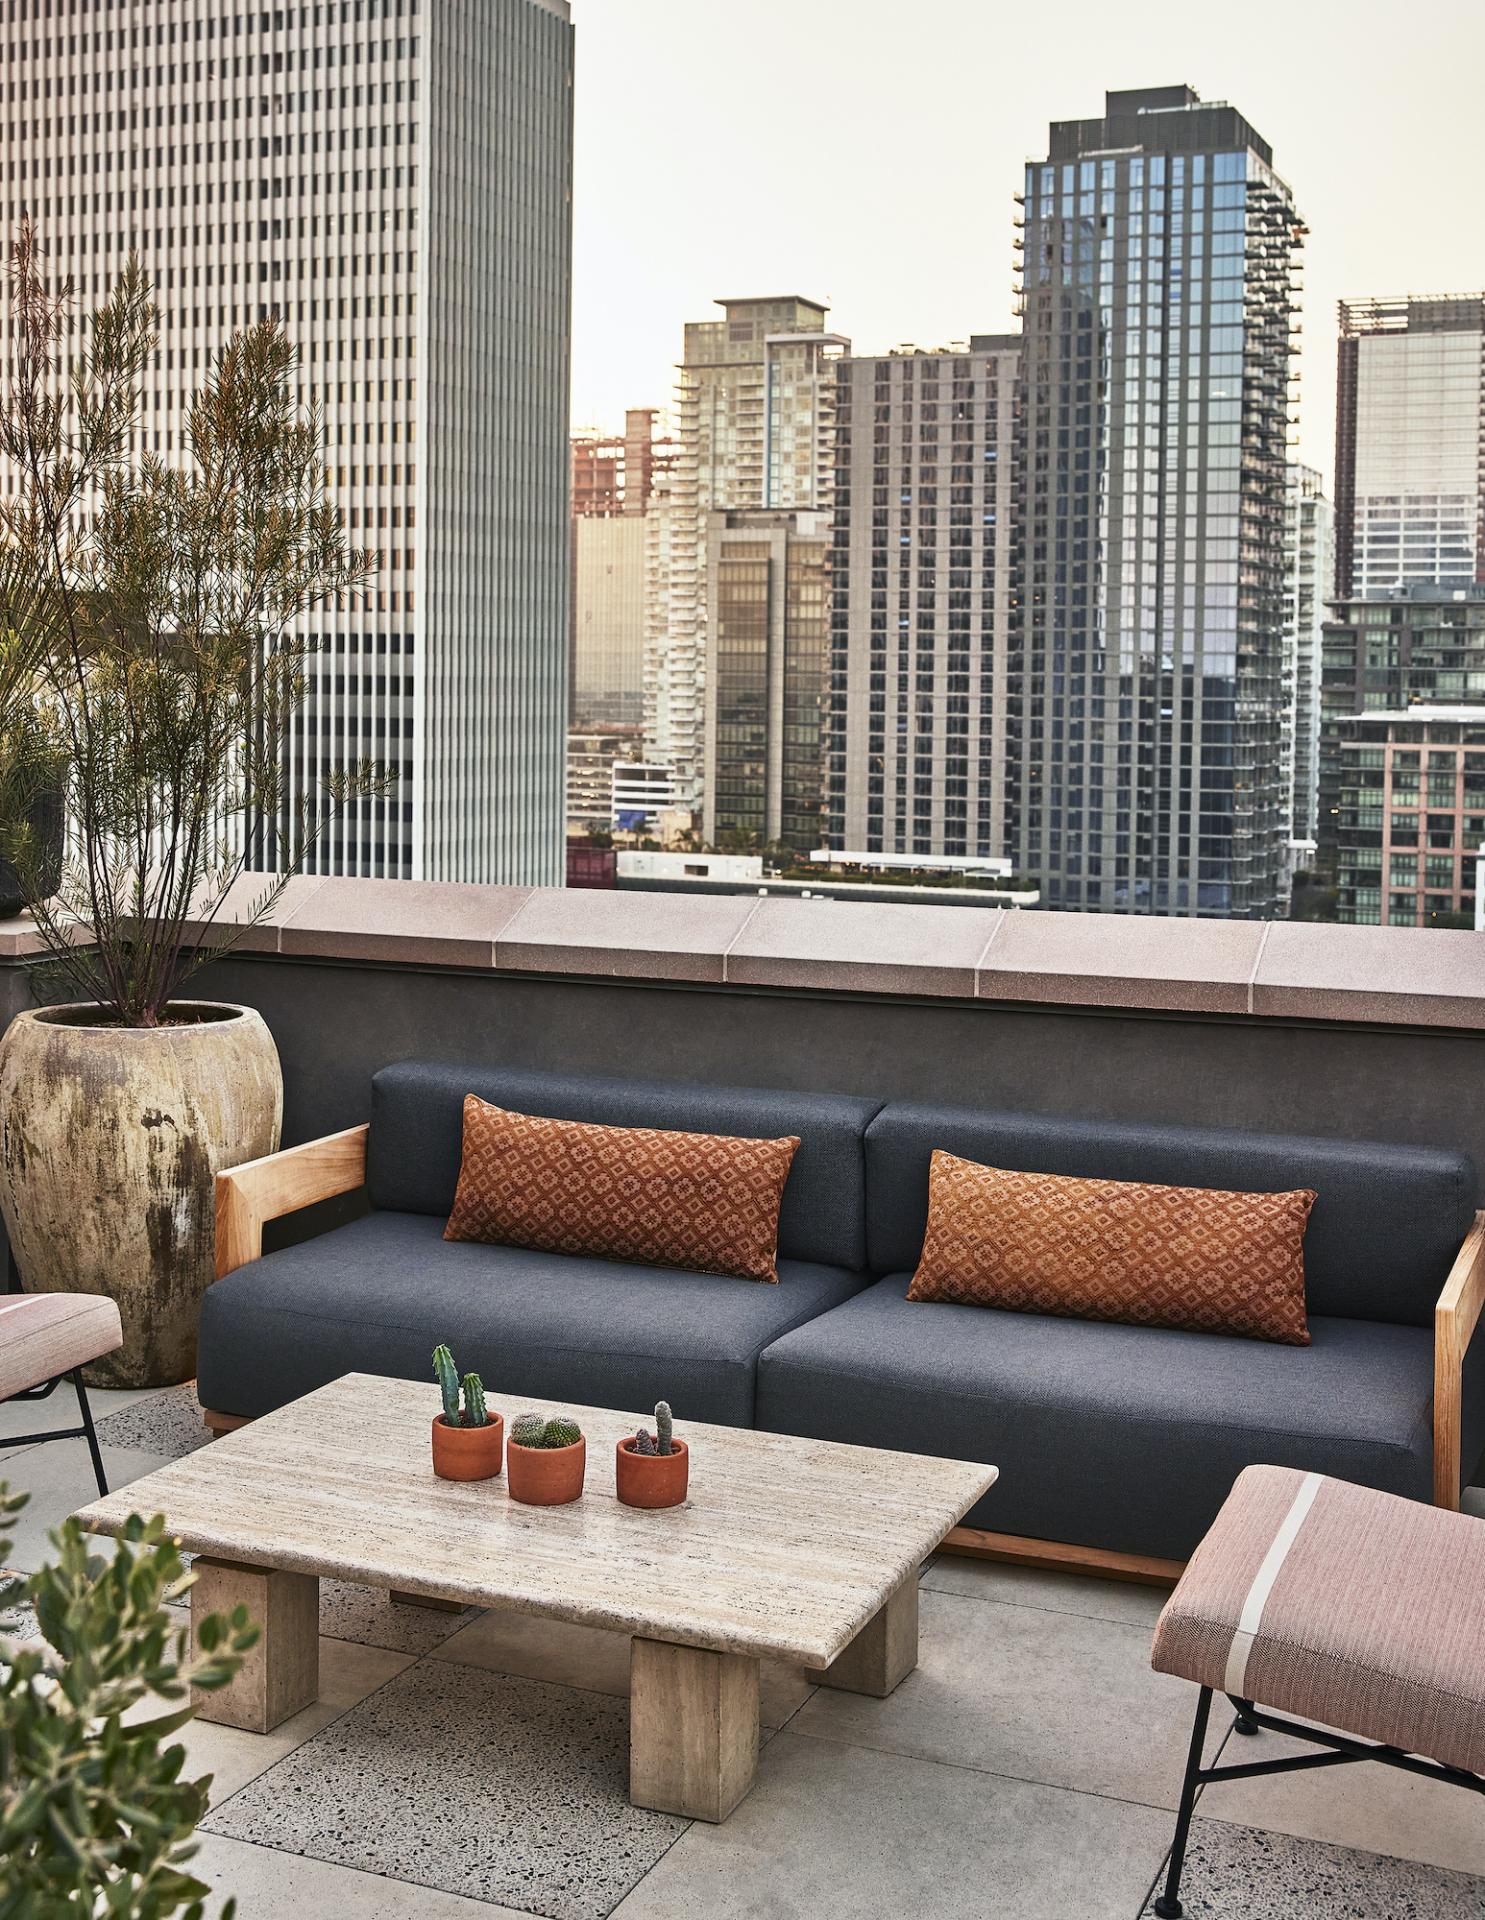 Our Top 10 Hotels by Design: The Downtown L.A. Proper Hotel